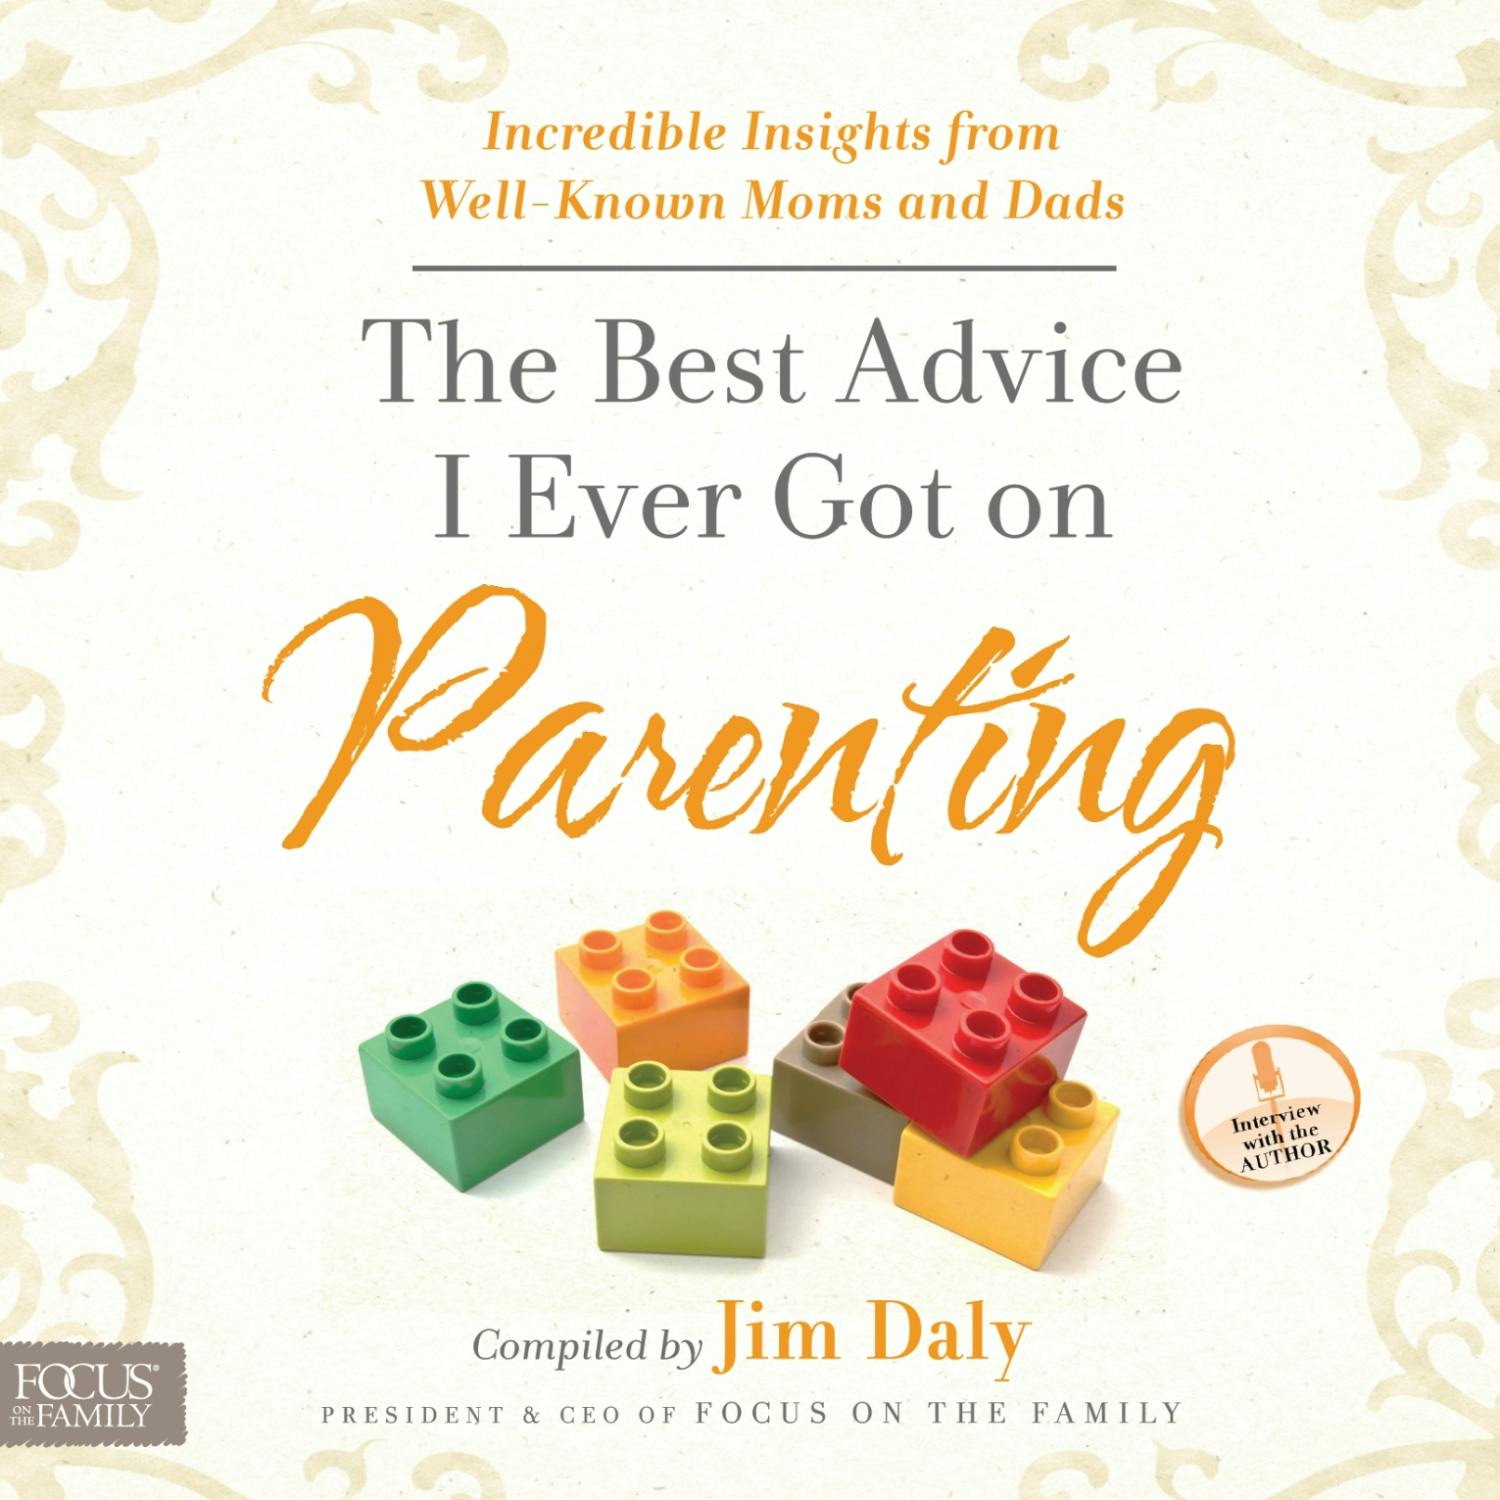 The Best Advice I Ever Got on Parenting: Incredible Insights from Well-known Moms and Dads - Jim Daly